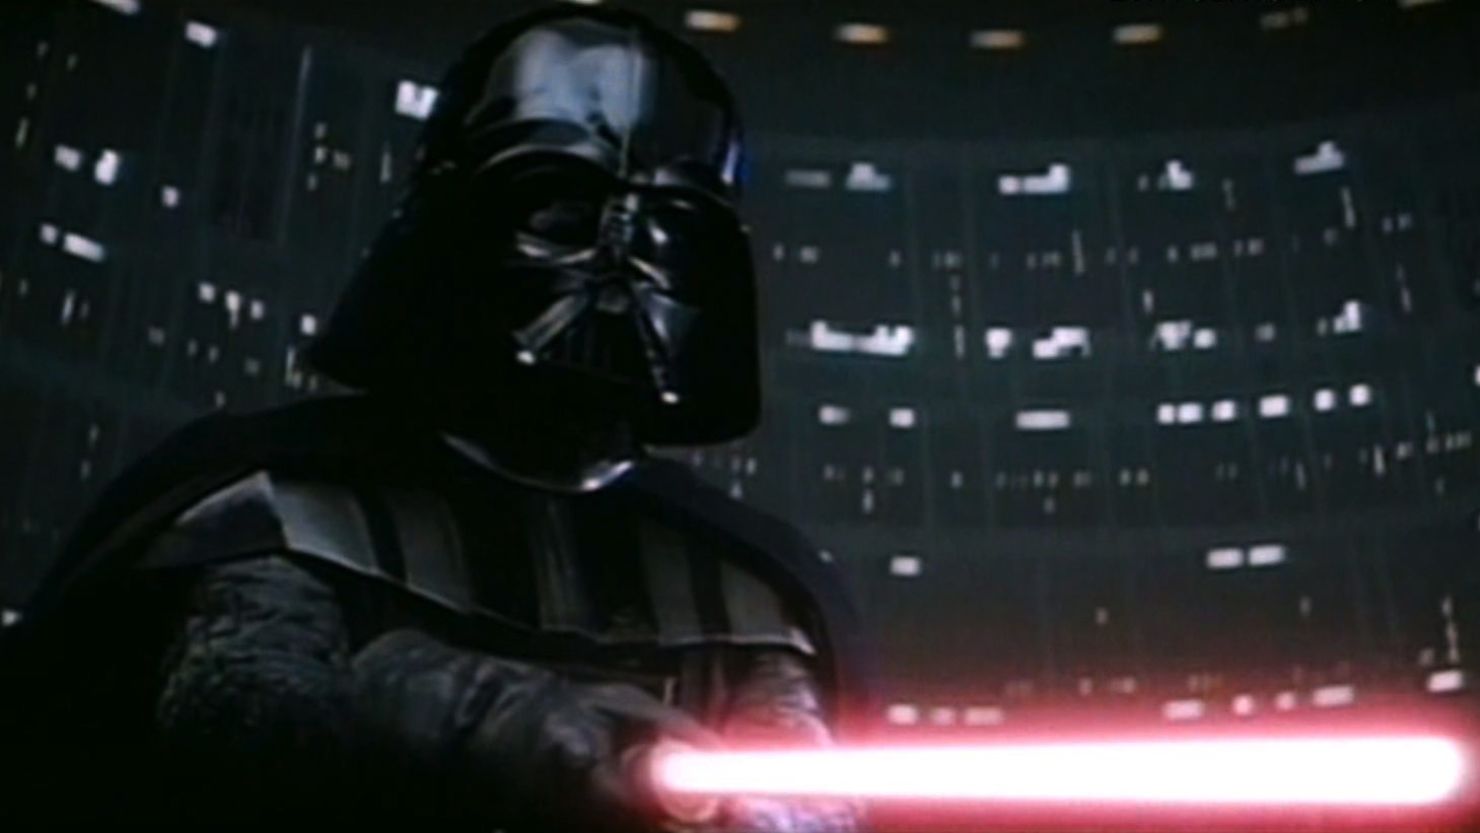 Darth Vader wields a lightsaber. Scientists have created molecules that behave a bit like the matter in the fictional weapons.